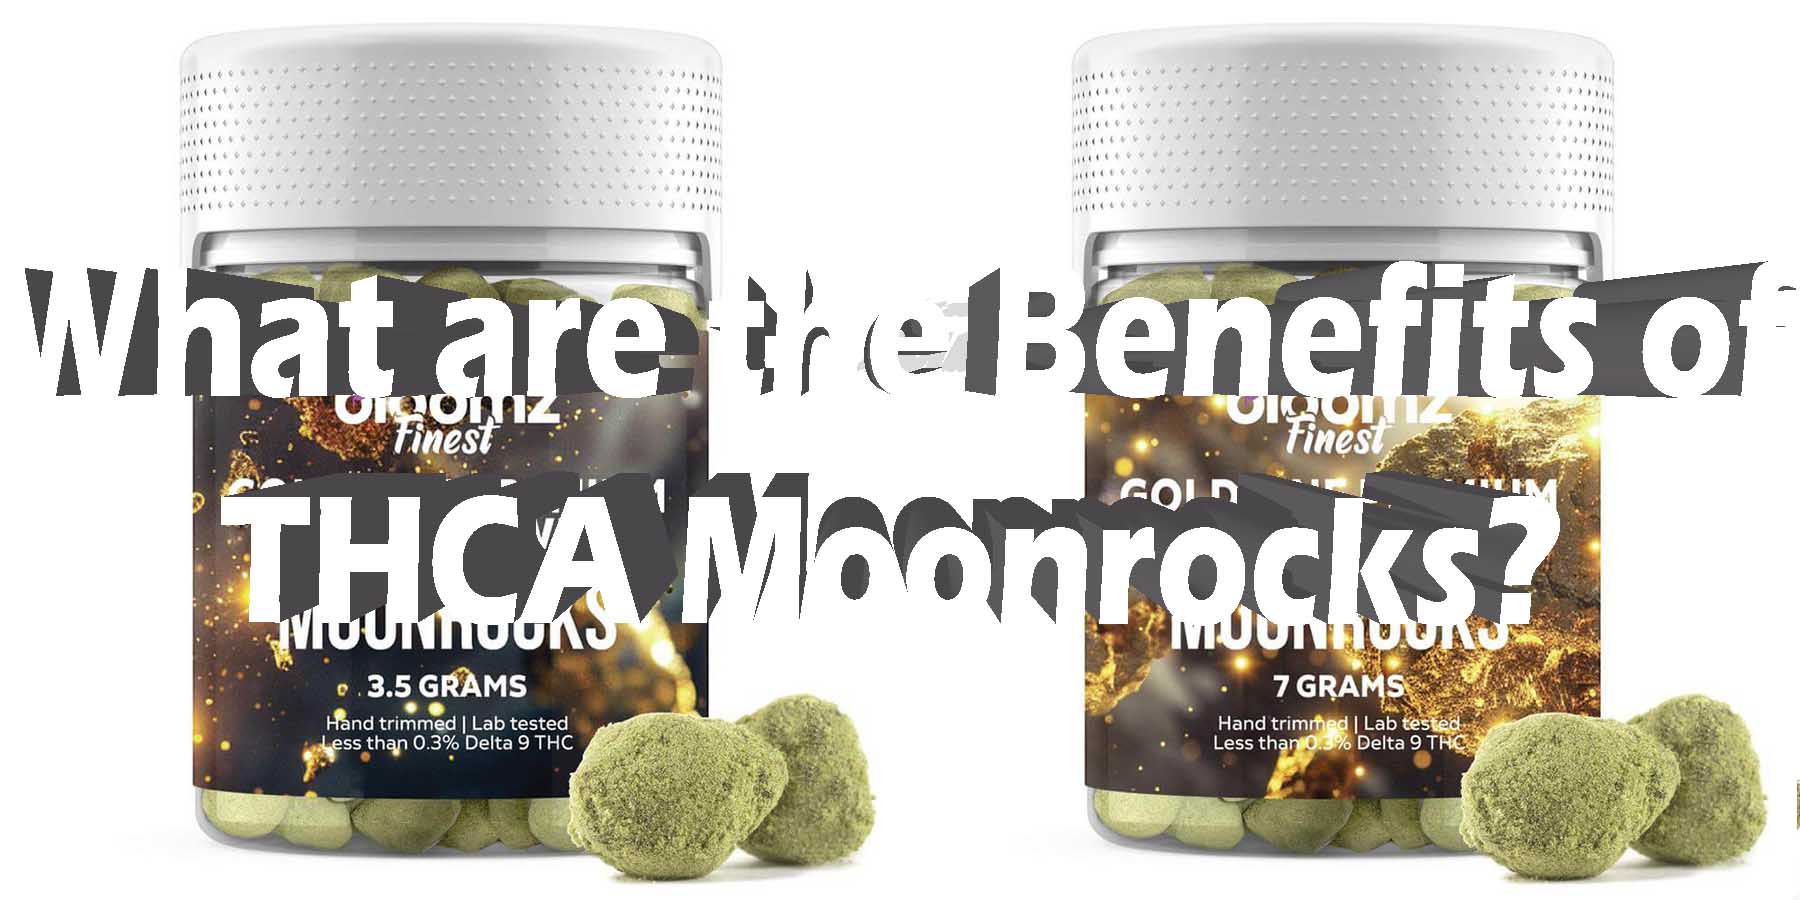 What are the Benefits of THCA Moonrocks Legal HC LowestPrice Coupon Discount For Smoking Best High Smoke Shop Online Near Me Online-Smoke Shop StrongestBrand Best Smoke Best Price Bloomz